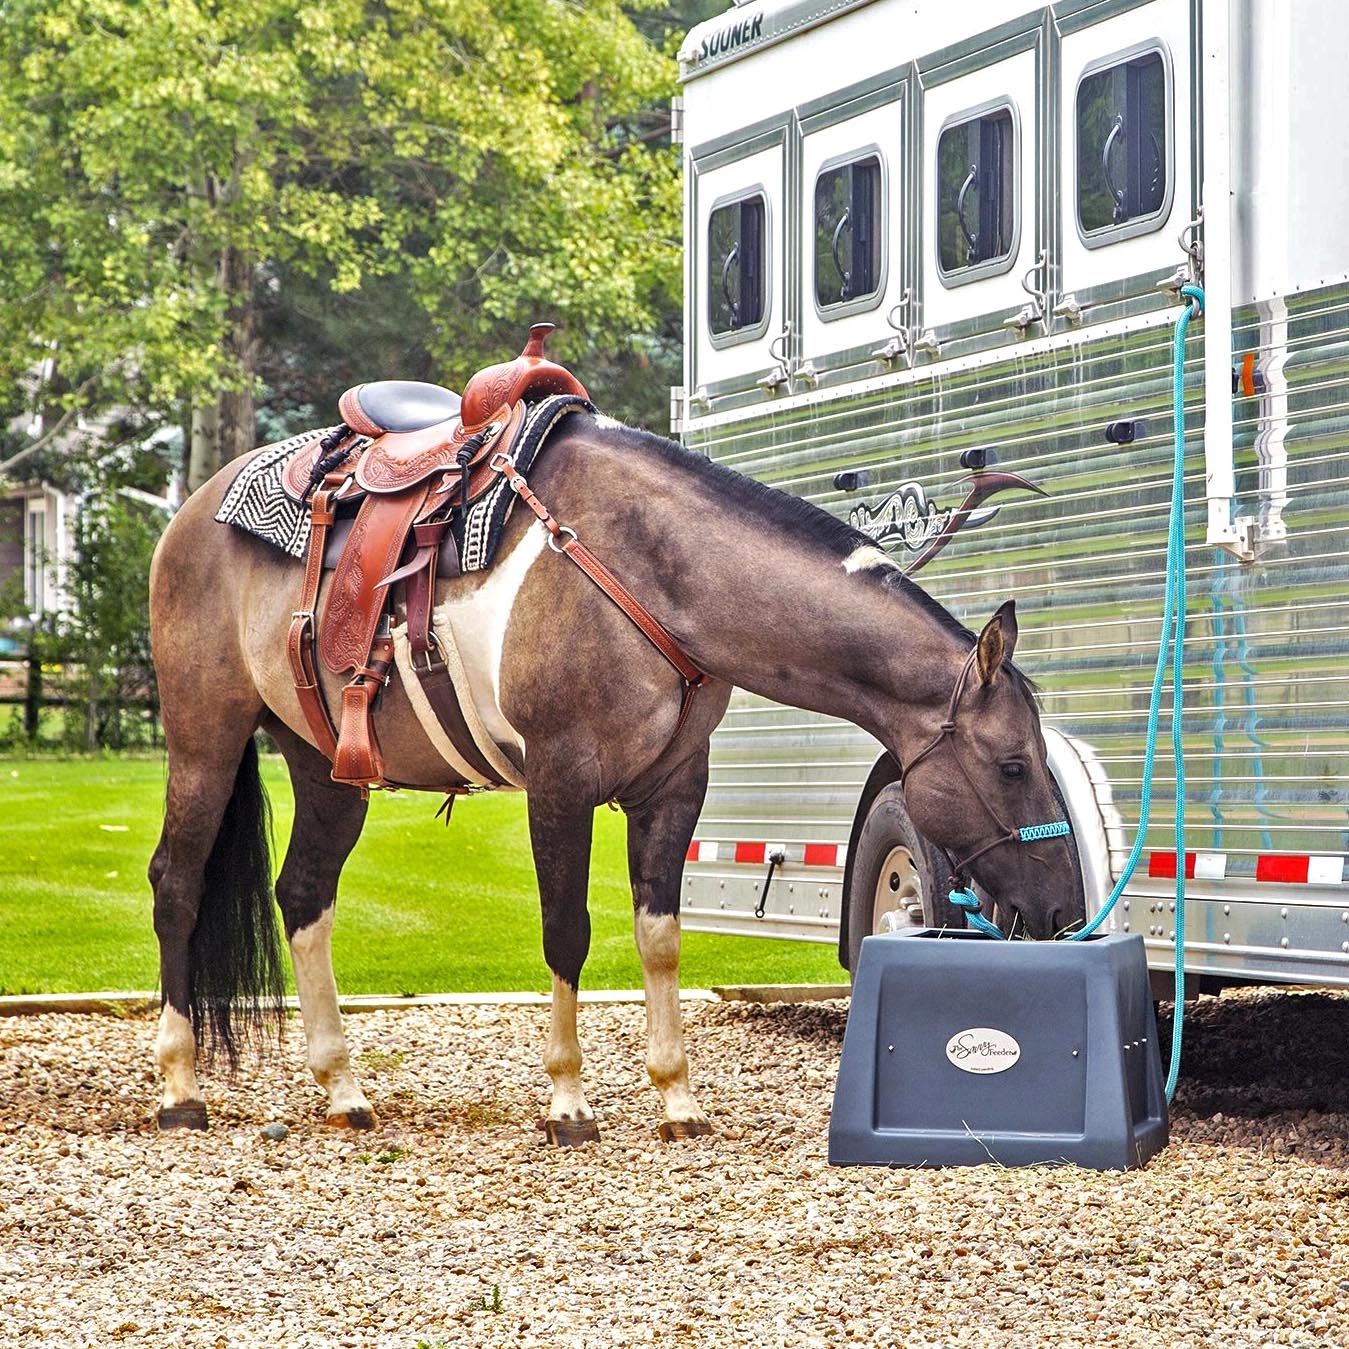 A tacked up paint horse eats hay from its Savvy Feeder beside an aluminum horse trailer.